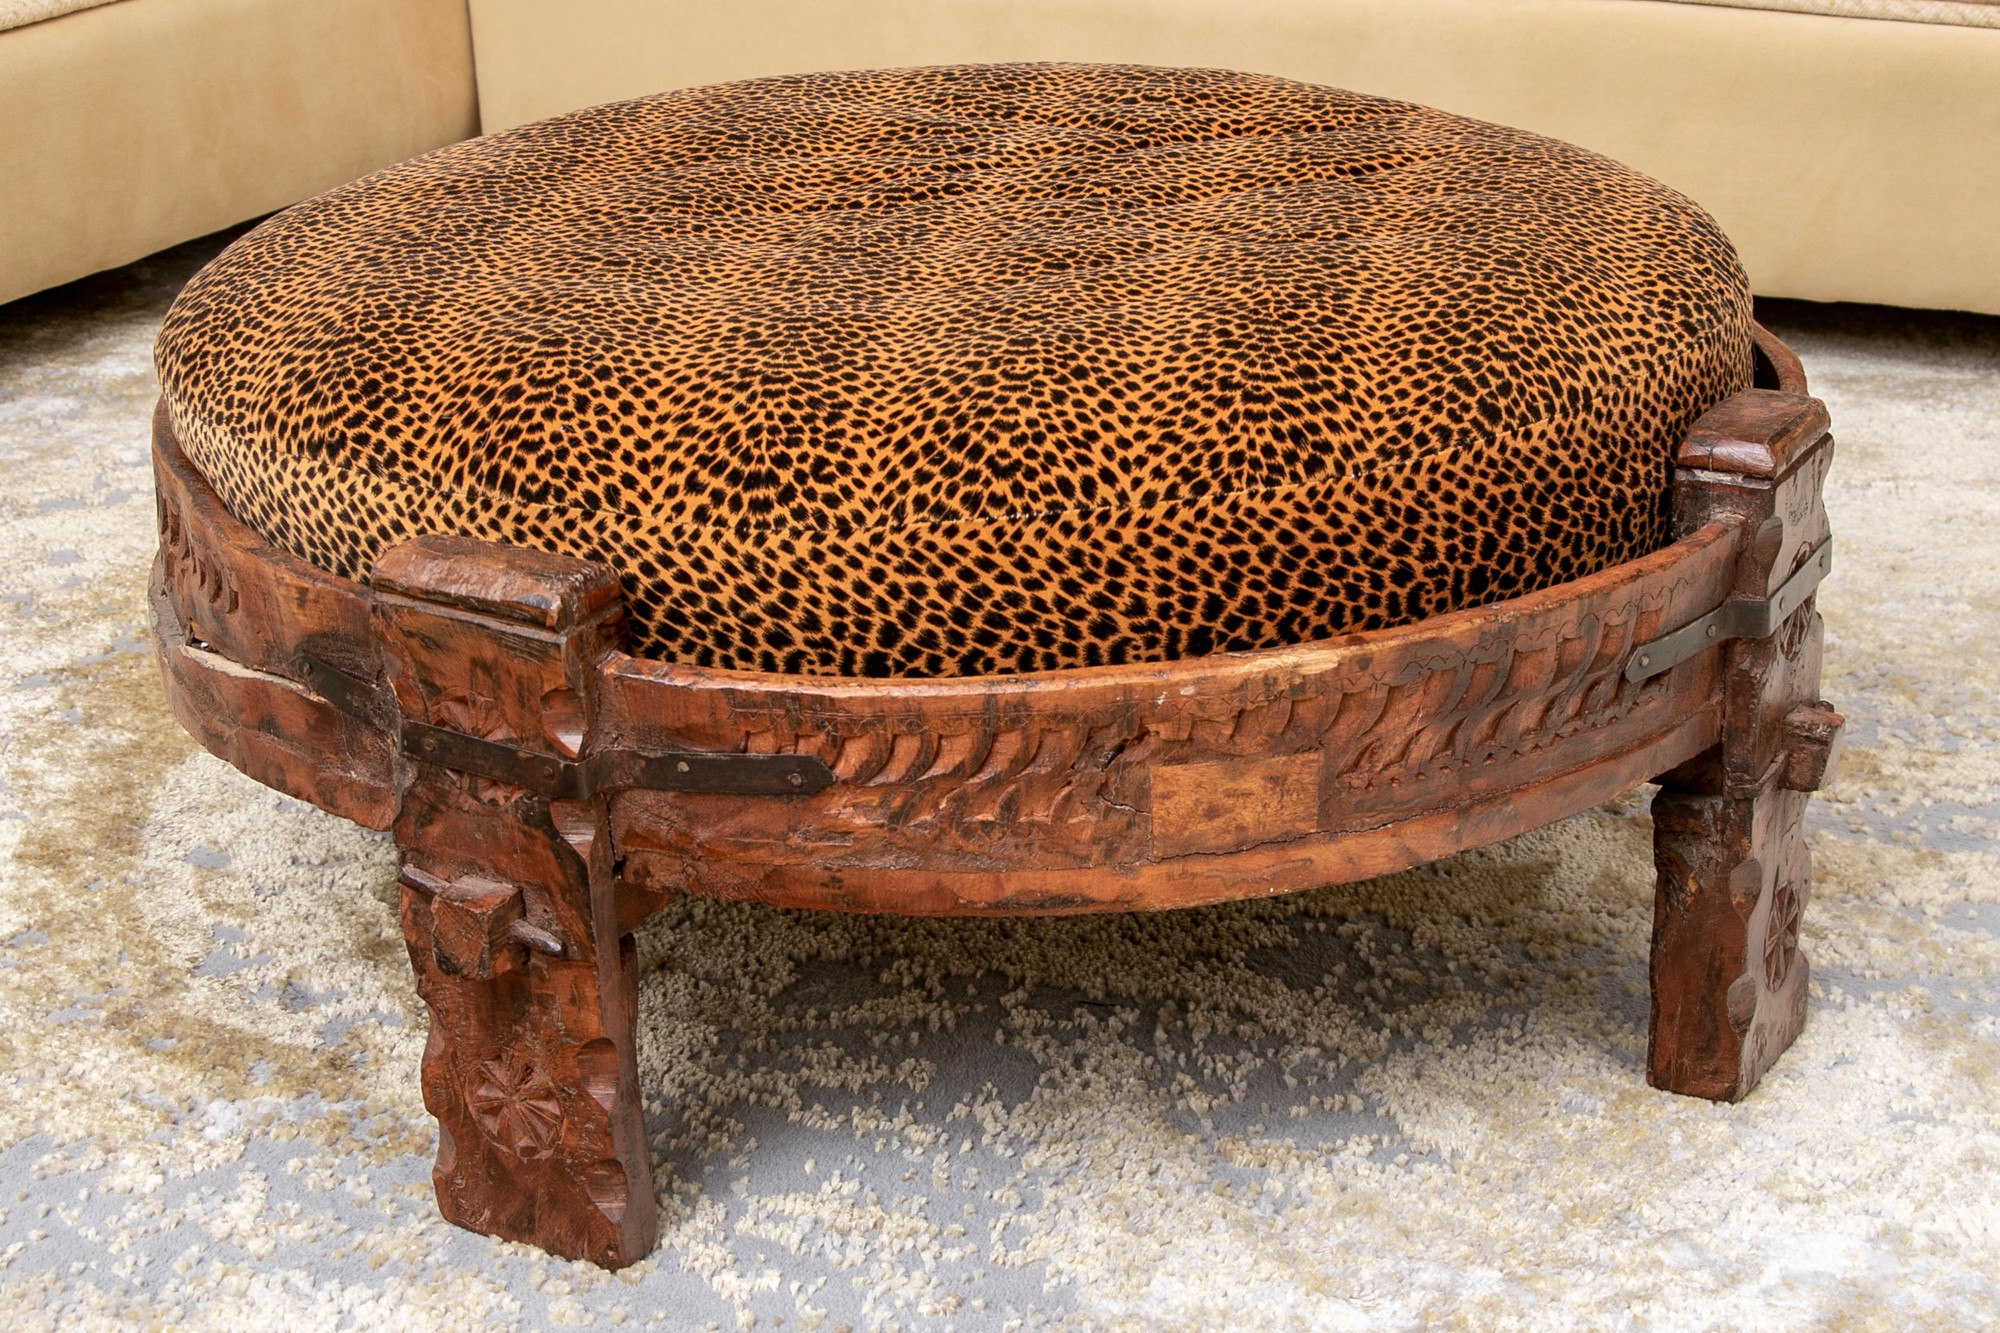 Large carved wood round ottoman with upholstered leopard